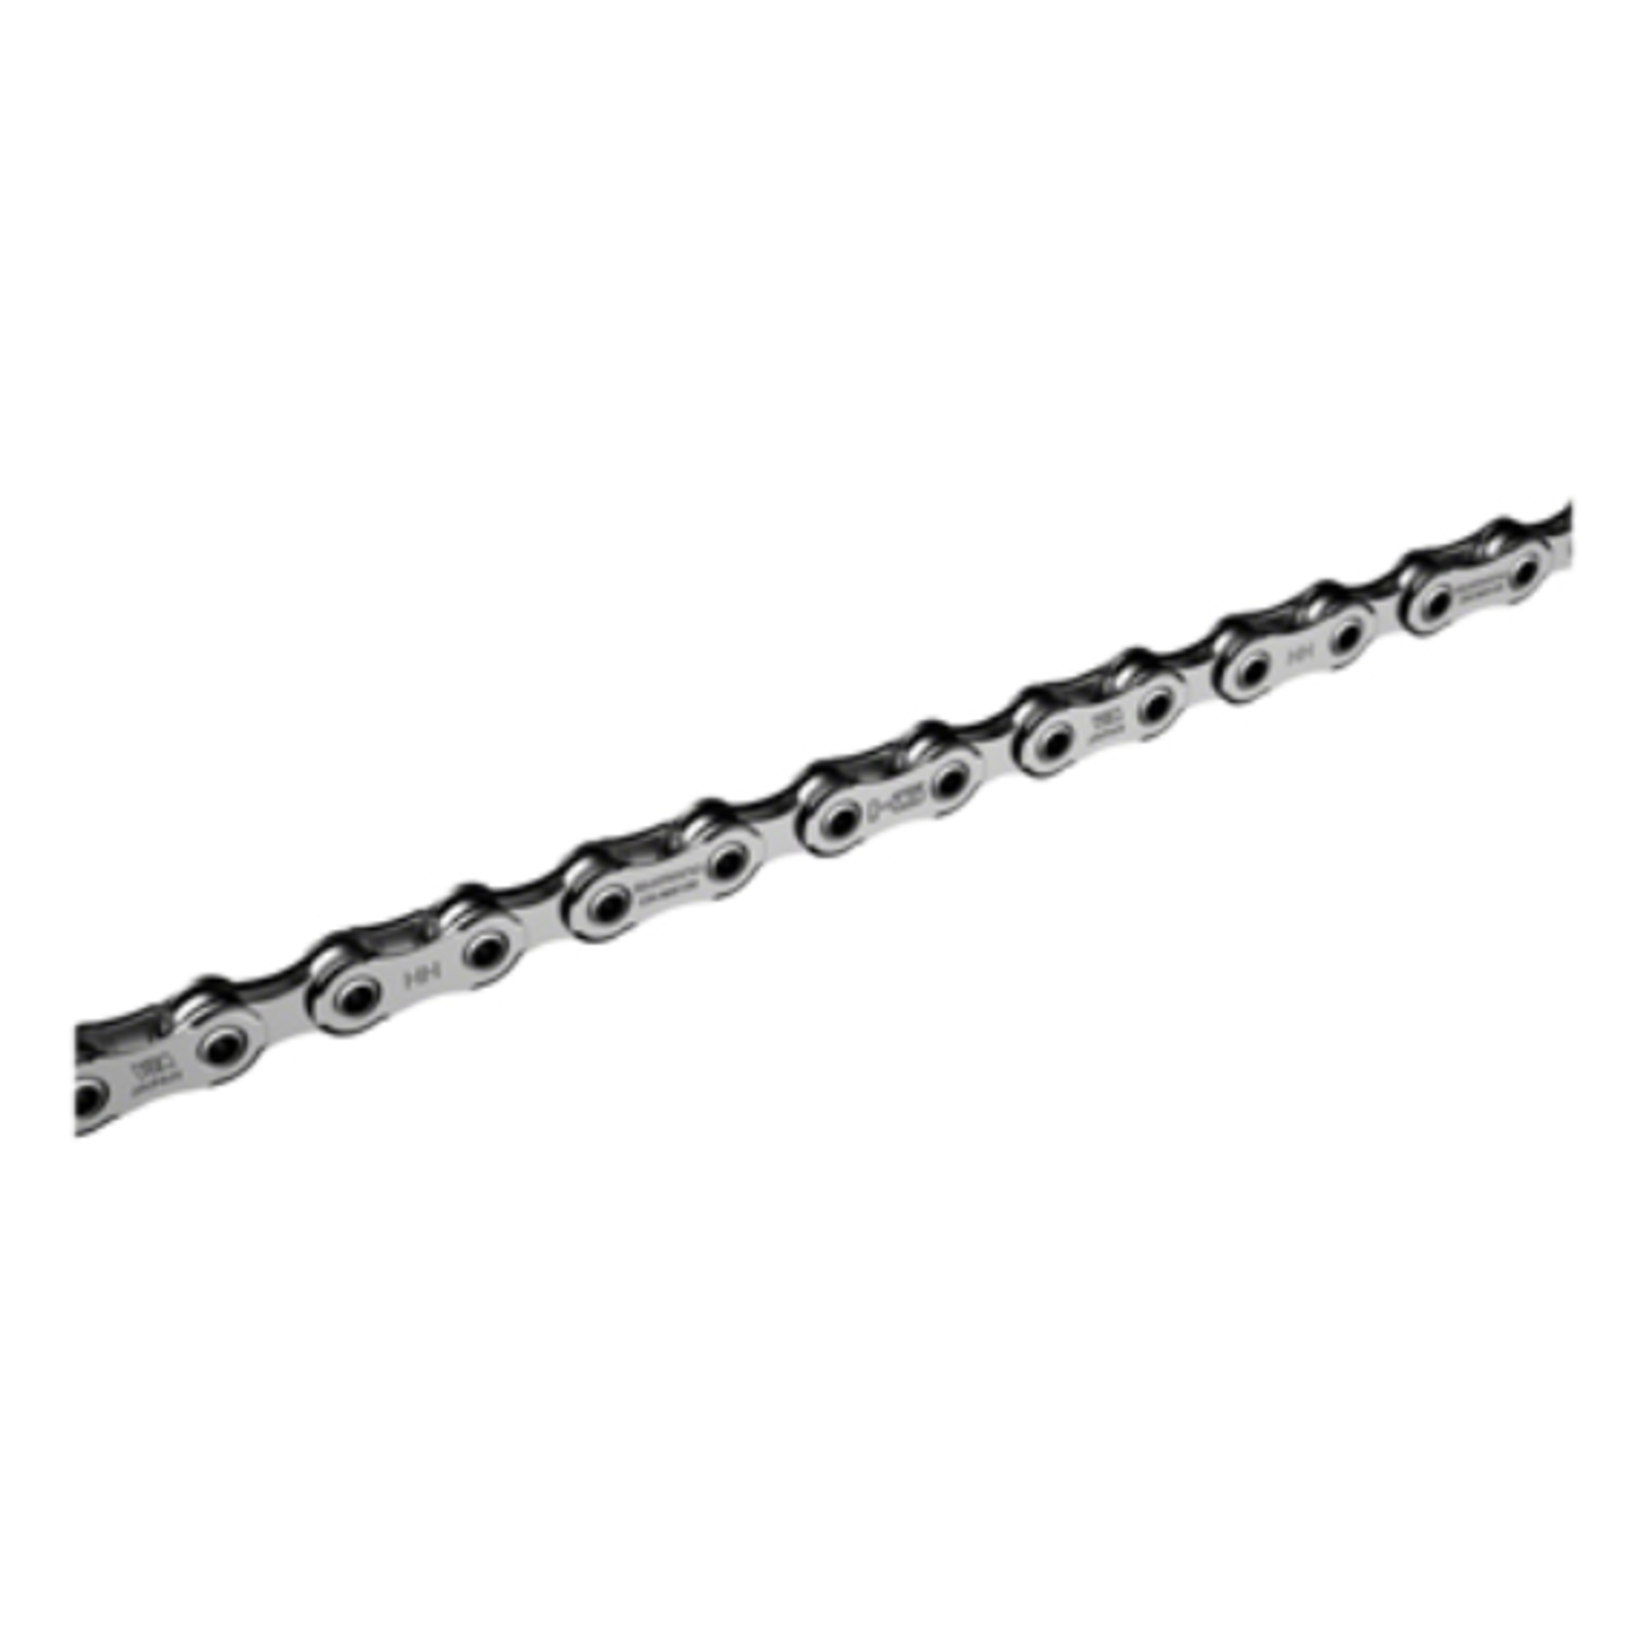 SHIMANO Shimano Deore CN-M6100 Chain - 12-Speed, 126 Links, Silver, Hyperglide